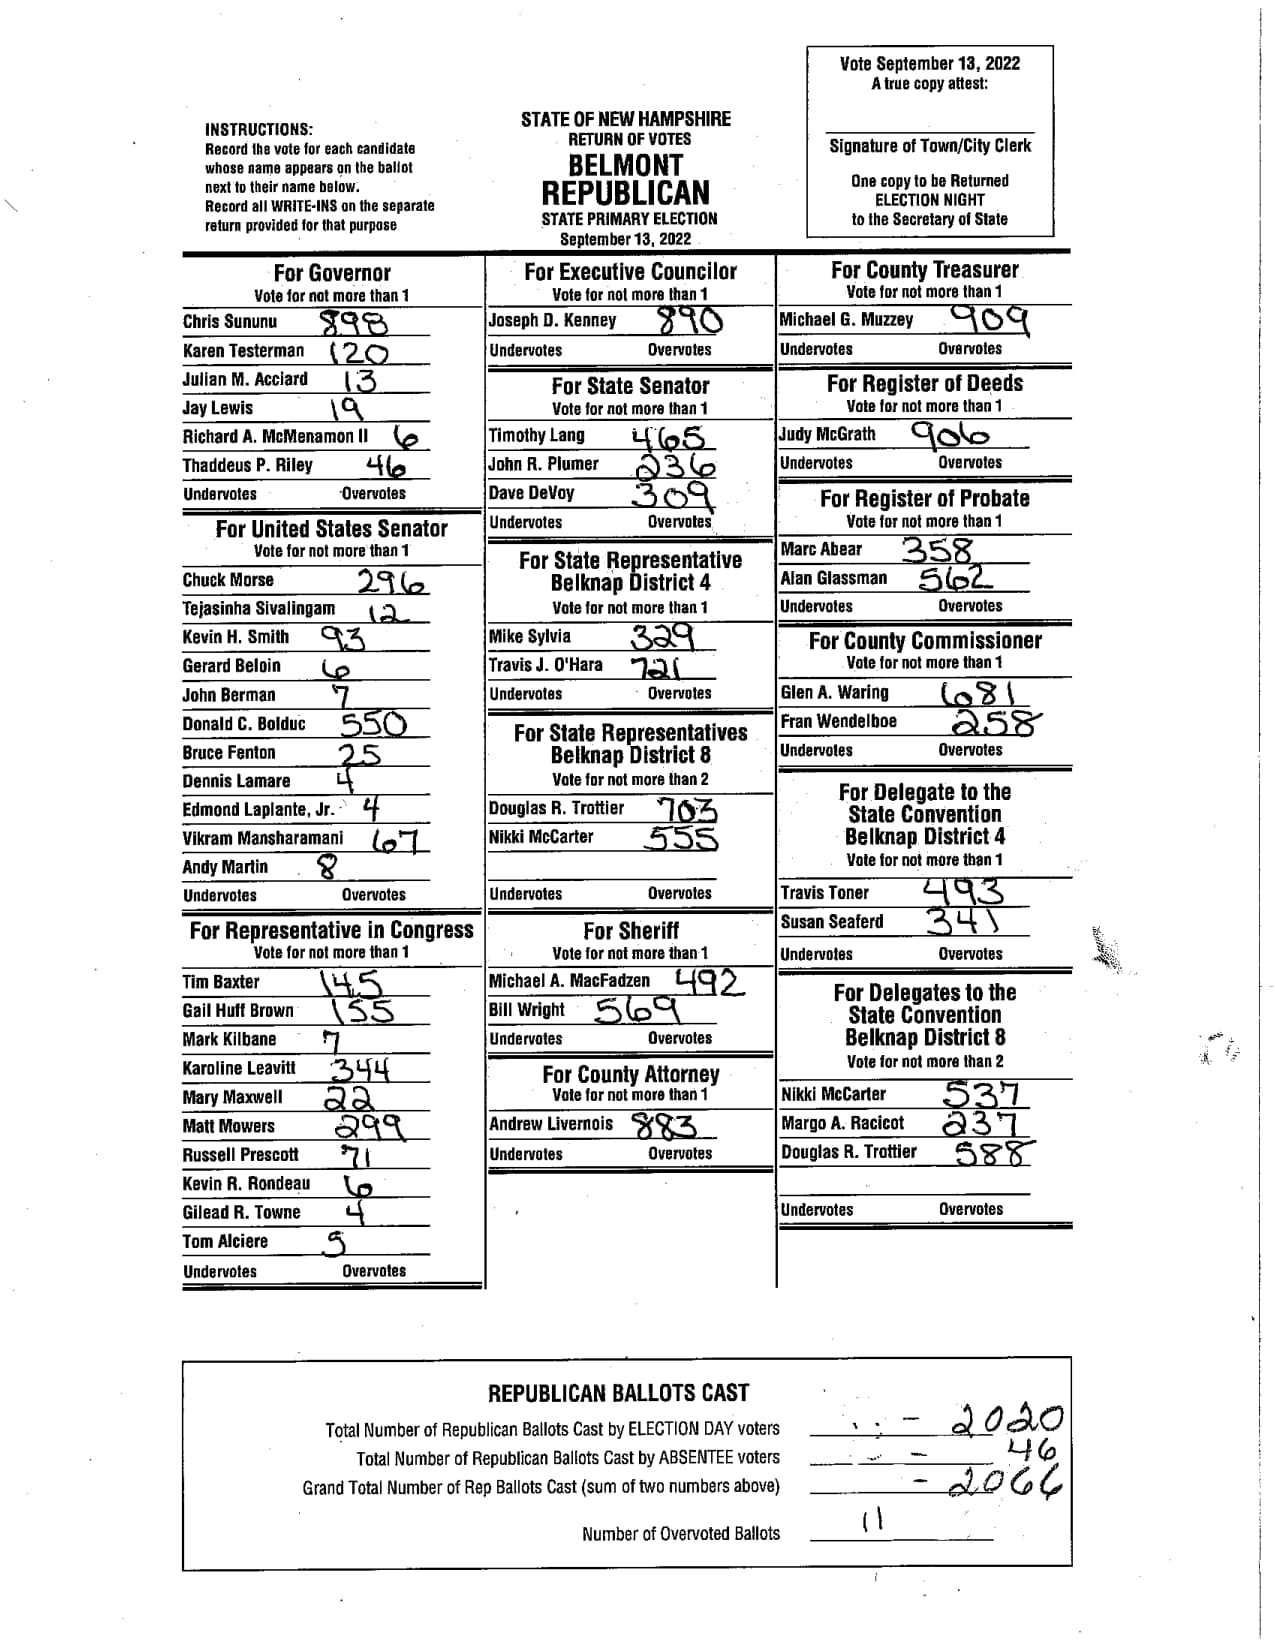 Primary Results Page 1